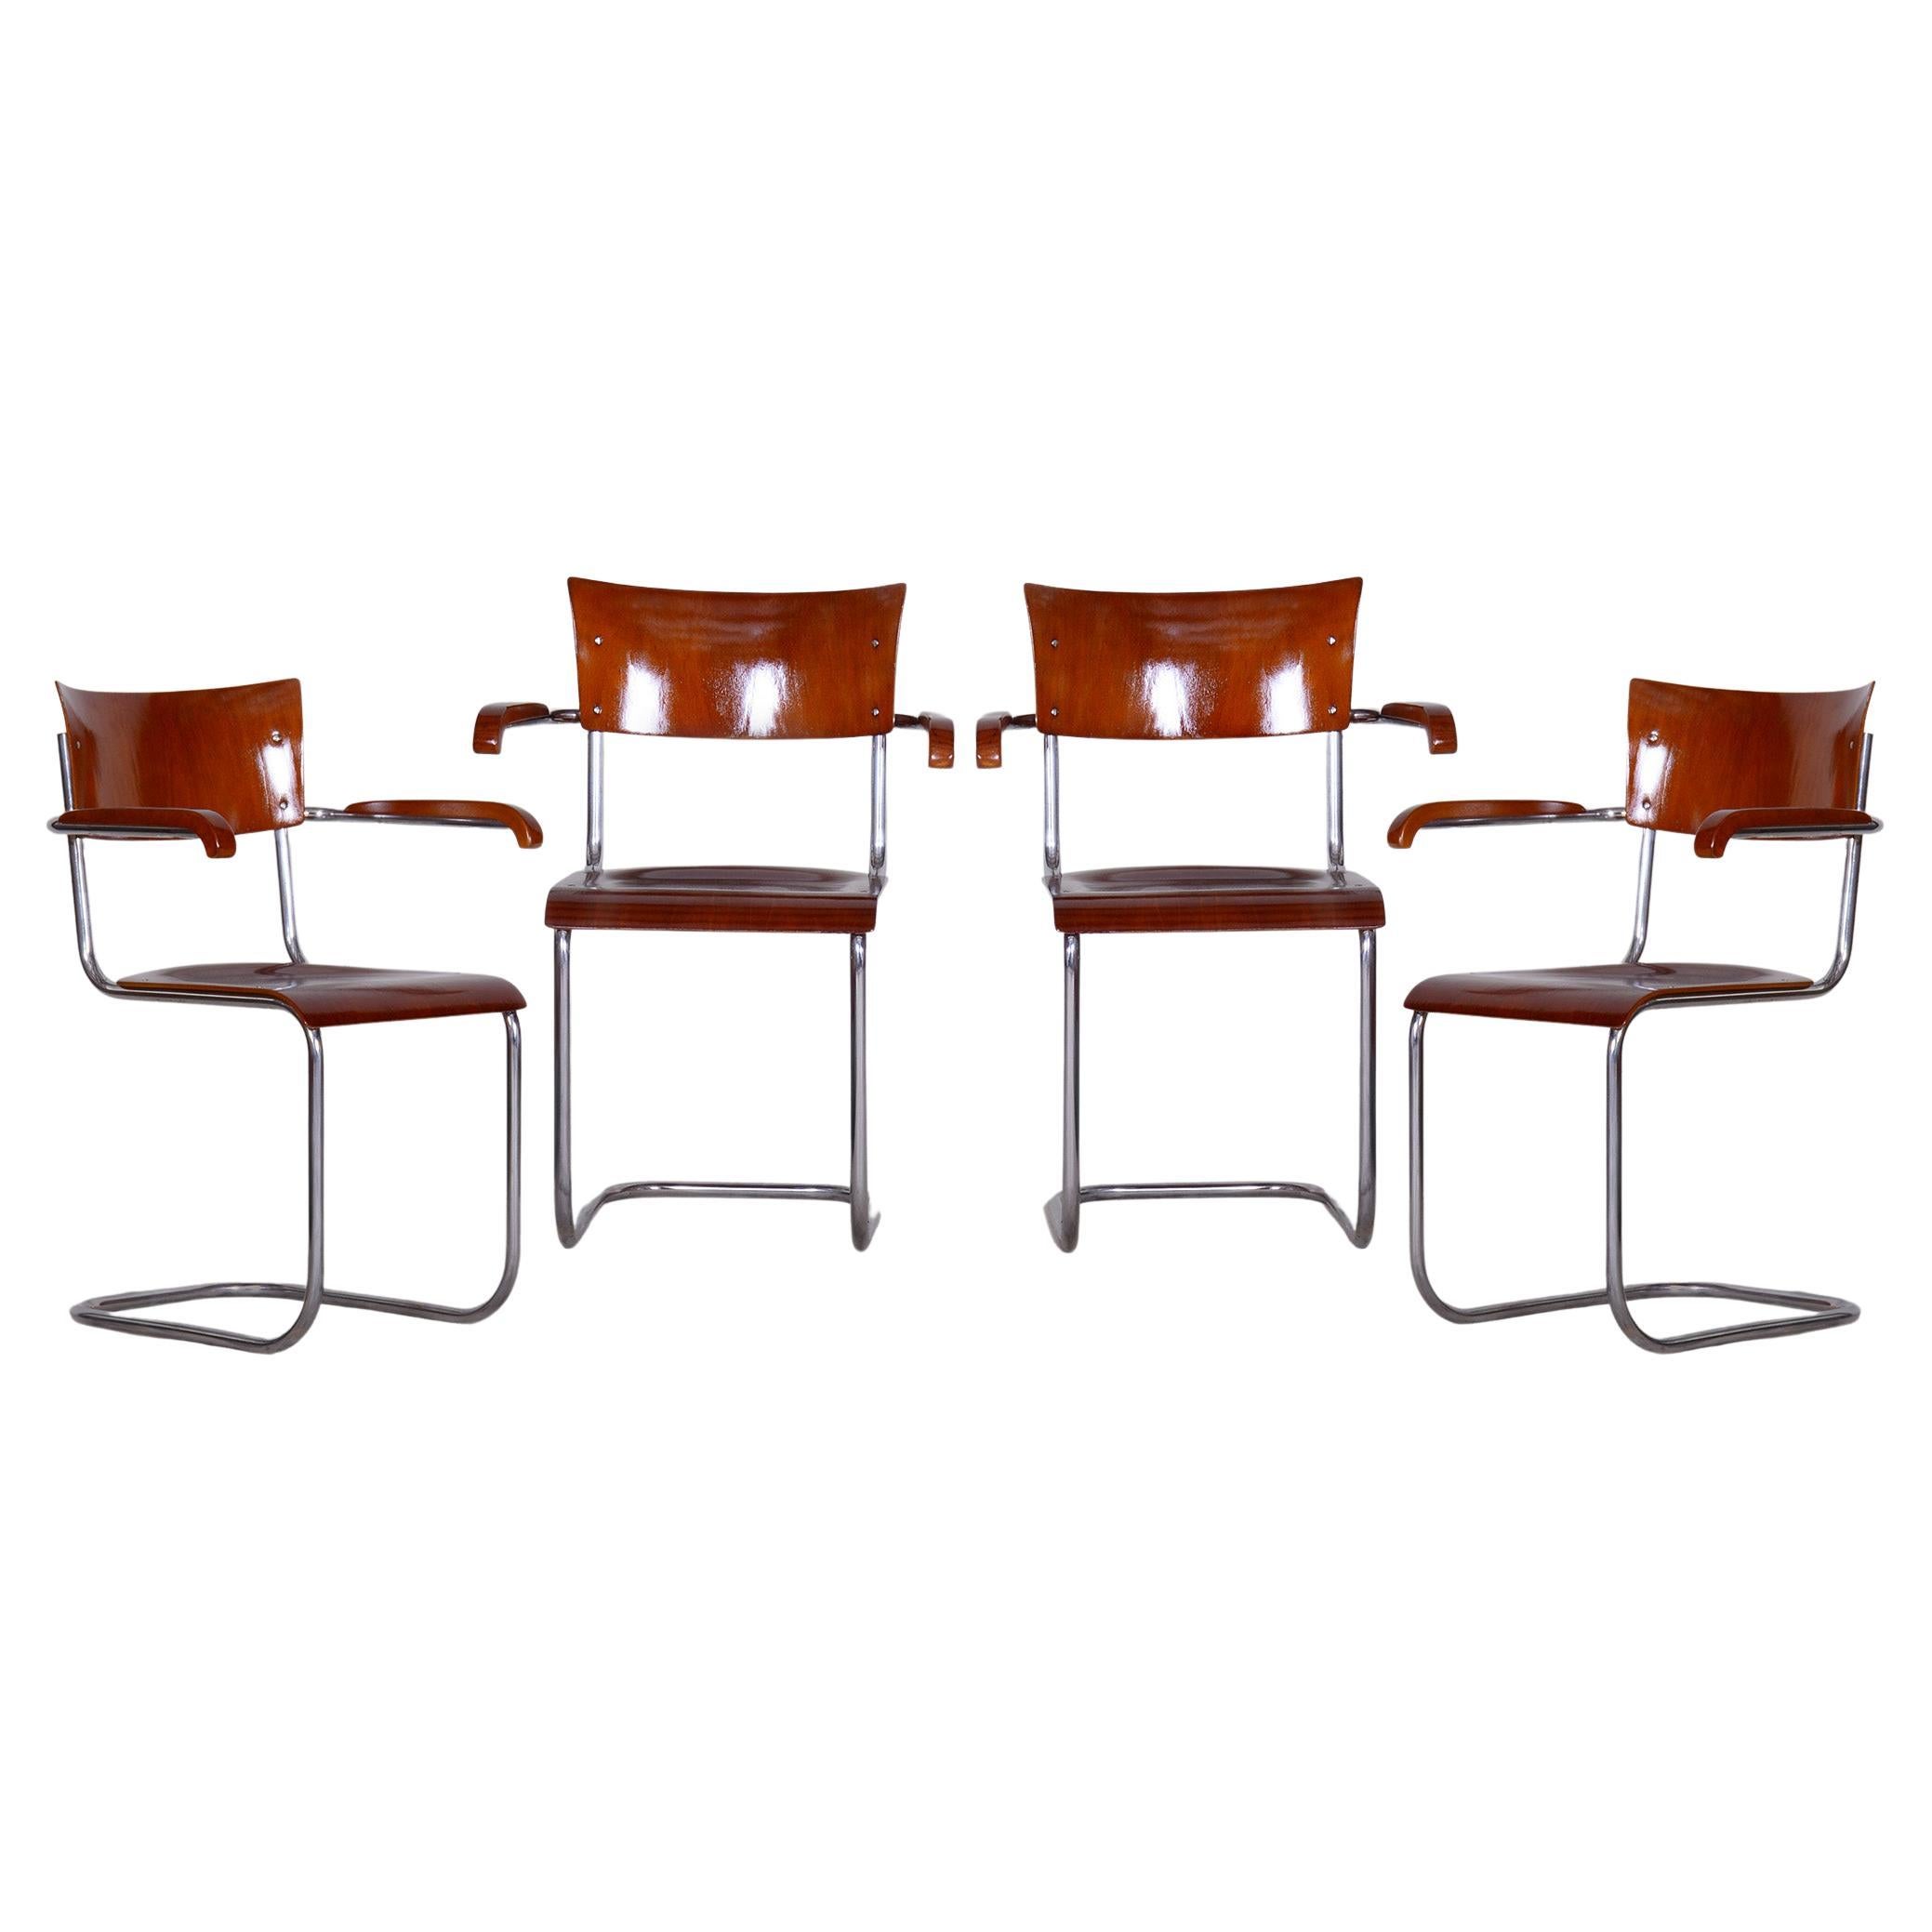 Set of 4 Restored Bauhaus Beech Plywood Armchairs by Mart Stam, 1930s, Germany For Sale